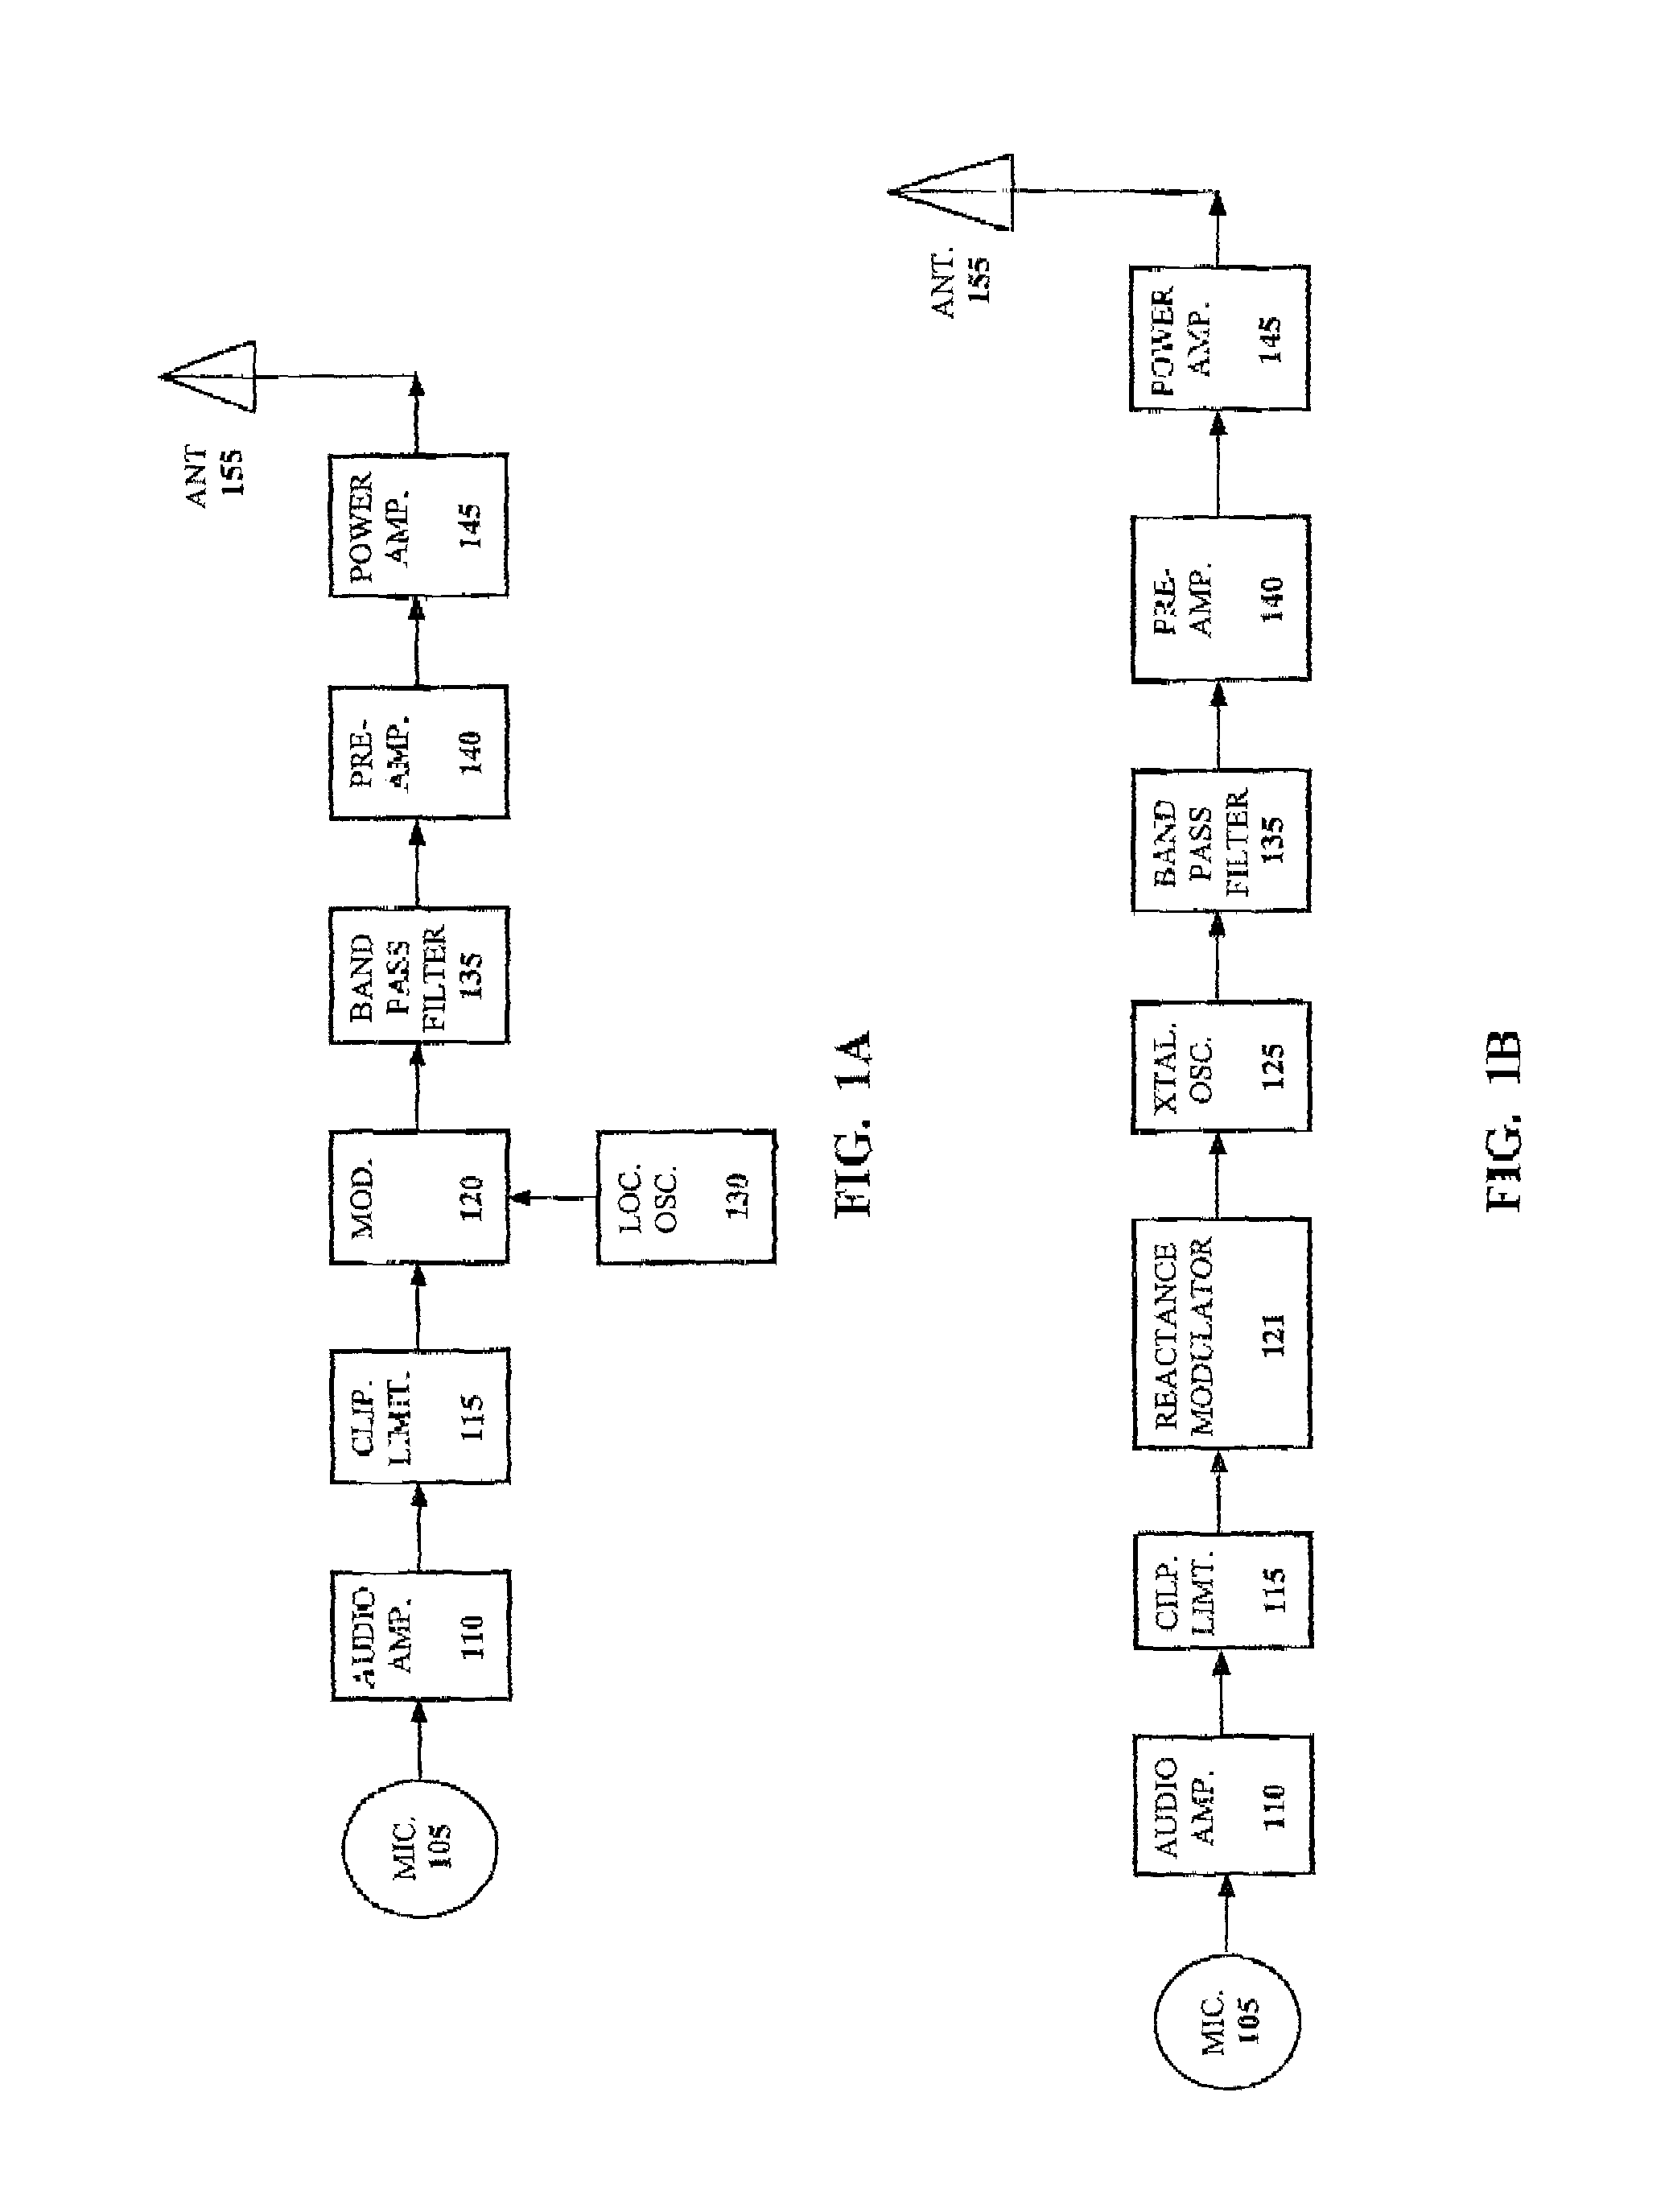 System and method for bandwidth compression of frequency and phase modulated signals and suppression of the upper and lower sidebands from the transmission medium